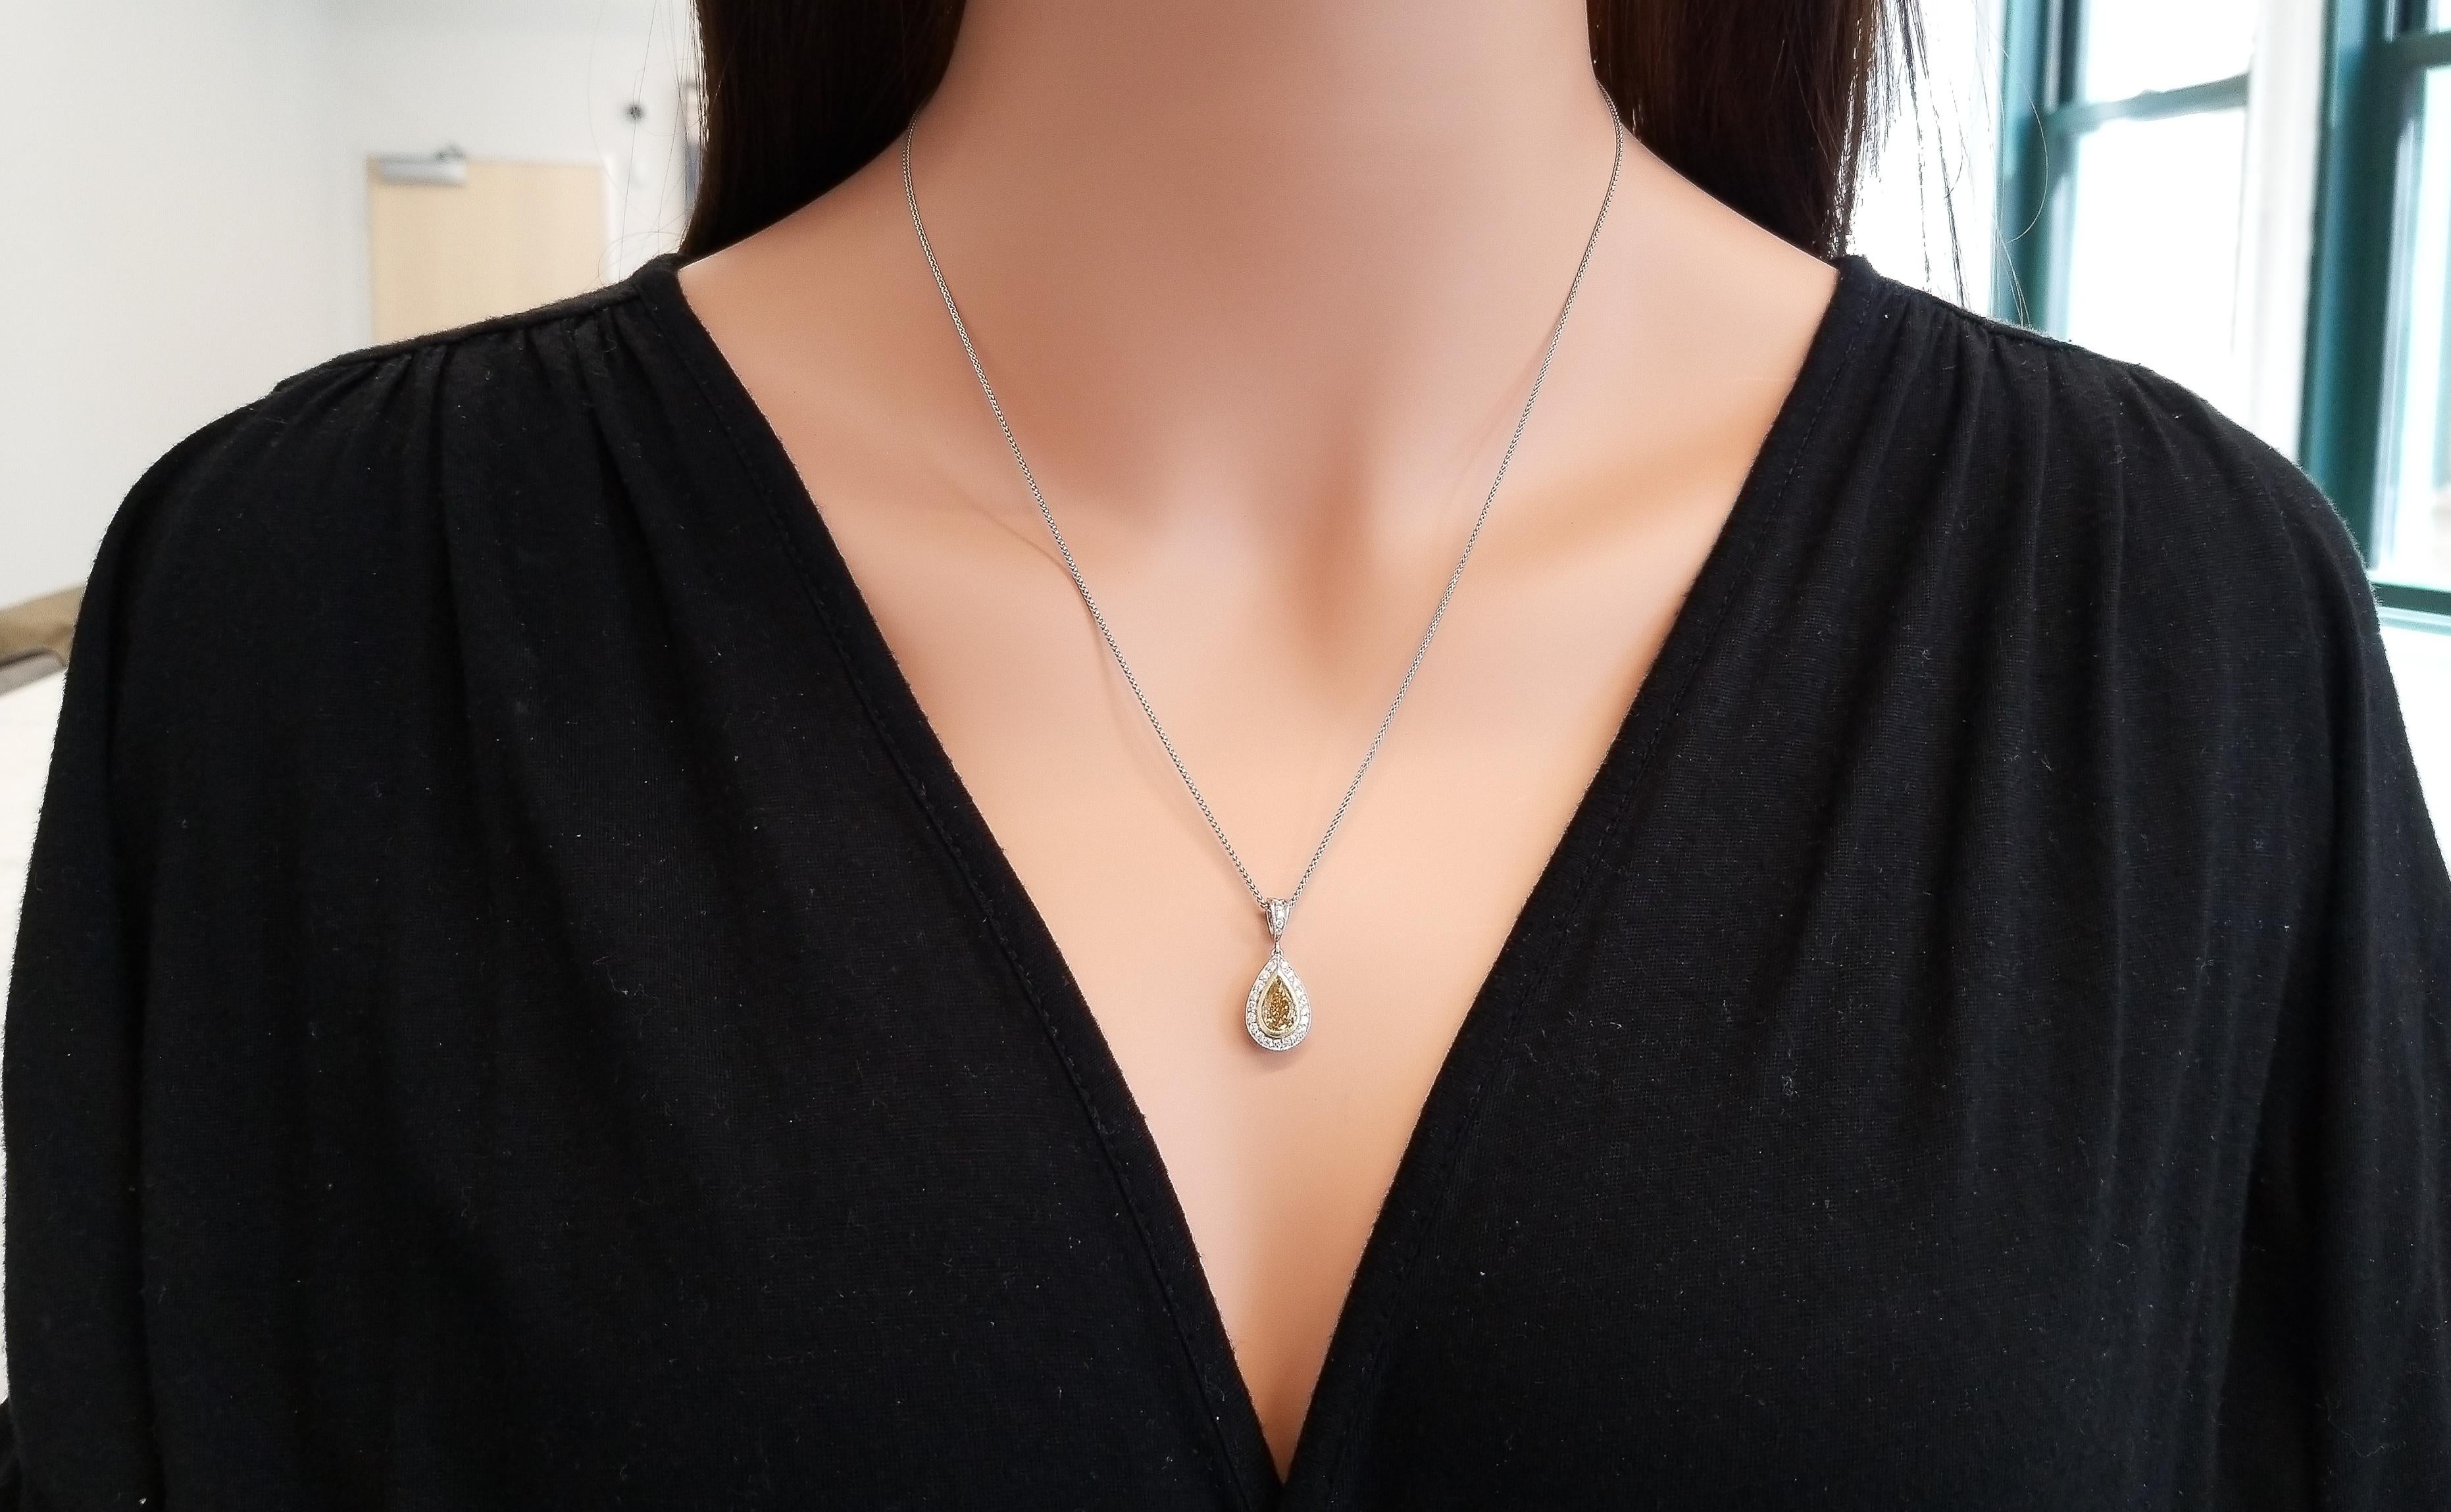 If you are looking for a pendant that will delight the senses, then this one is for you! This elegant 18 karat white and yellow gold teardrop pendant is impossible not to notice. It features a 1.07 carat measuring 8.45 x 5.75 millimeter natural